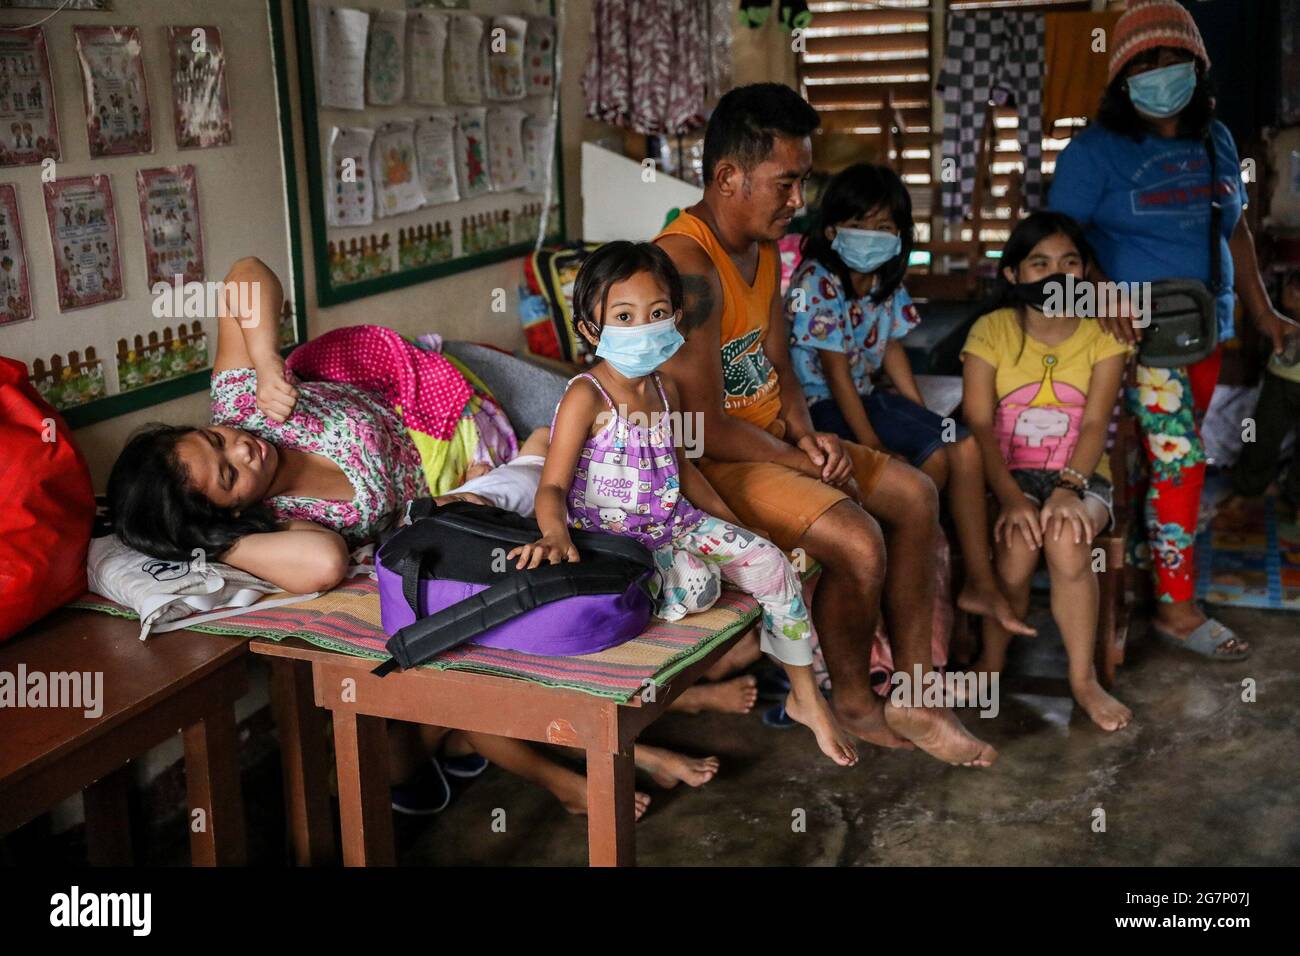 Residents stay inside a school turned into a temporary evacuation center as the Taal volcano releases smoke and ash in Agoncillo town, Batangas province south of Manila. Taal, the second-most-active volcano in the country, emitted a dark plume of steam and ash in a brief explosion, indicating a hazardous explosive eruption is possible in hours or days. The explosion posed the threat of another eruption prompting the evacuation of thousands of villagers inside the volcano’s danger zone or high-risk areas. Philippines. Stock Photo